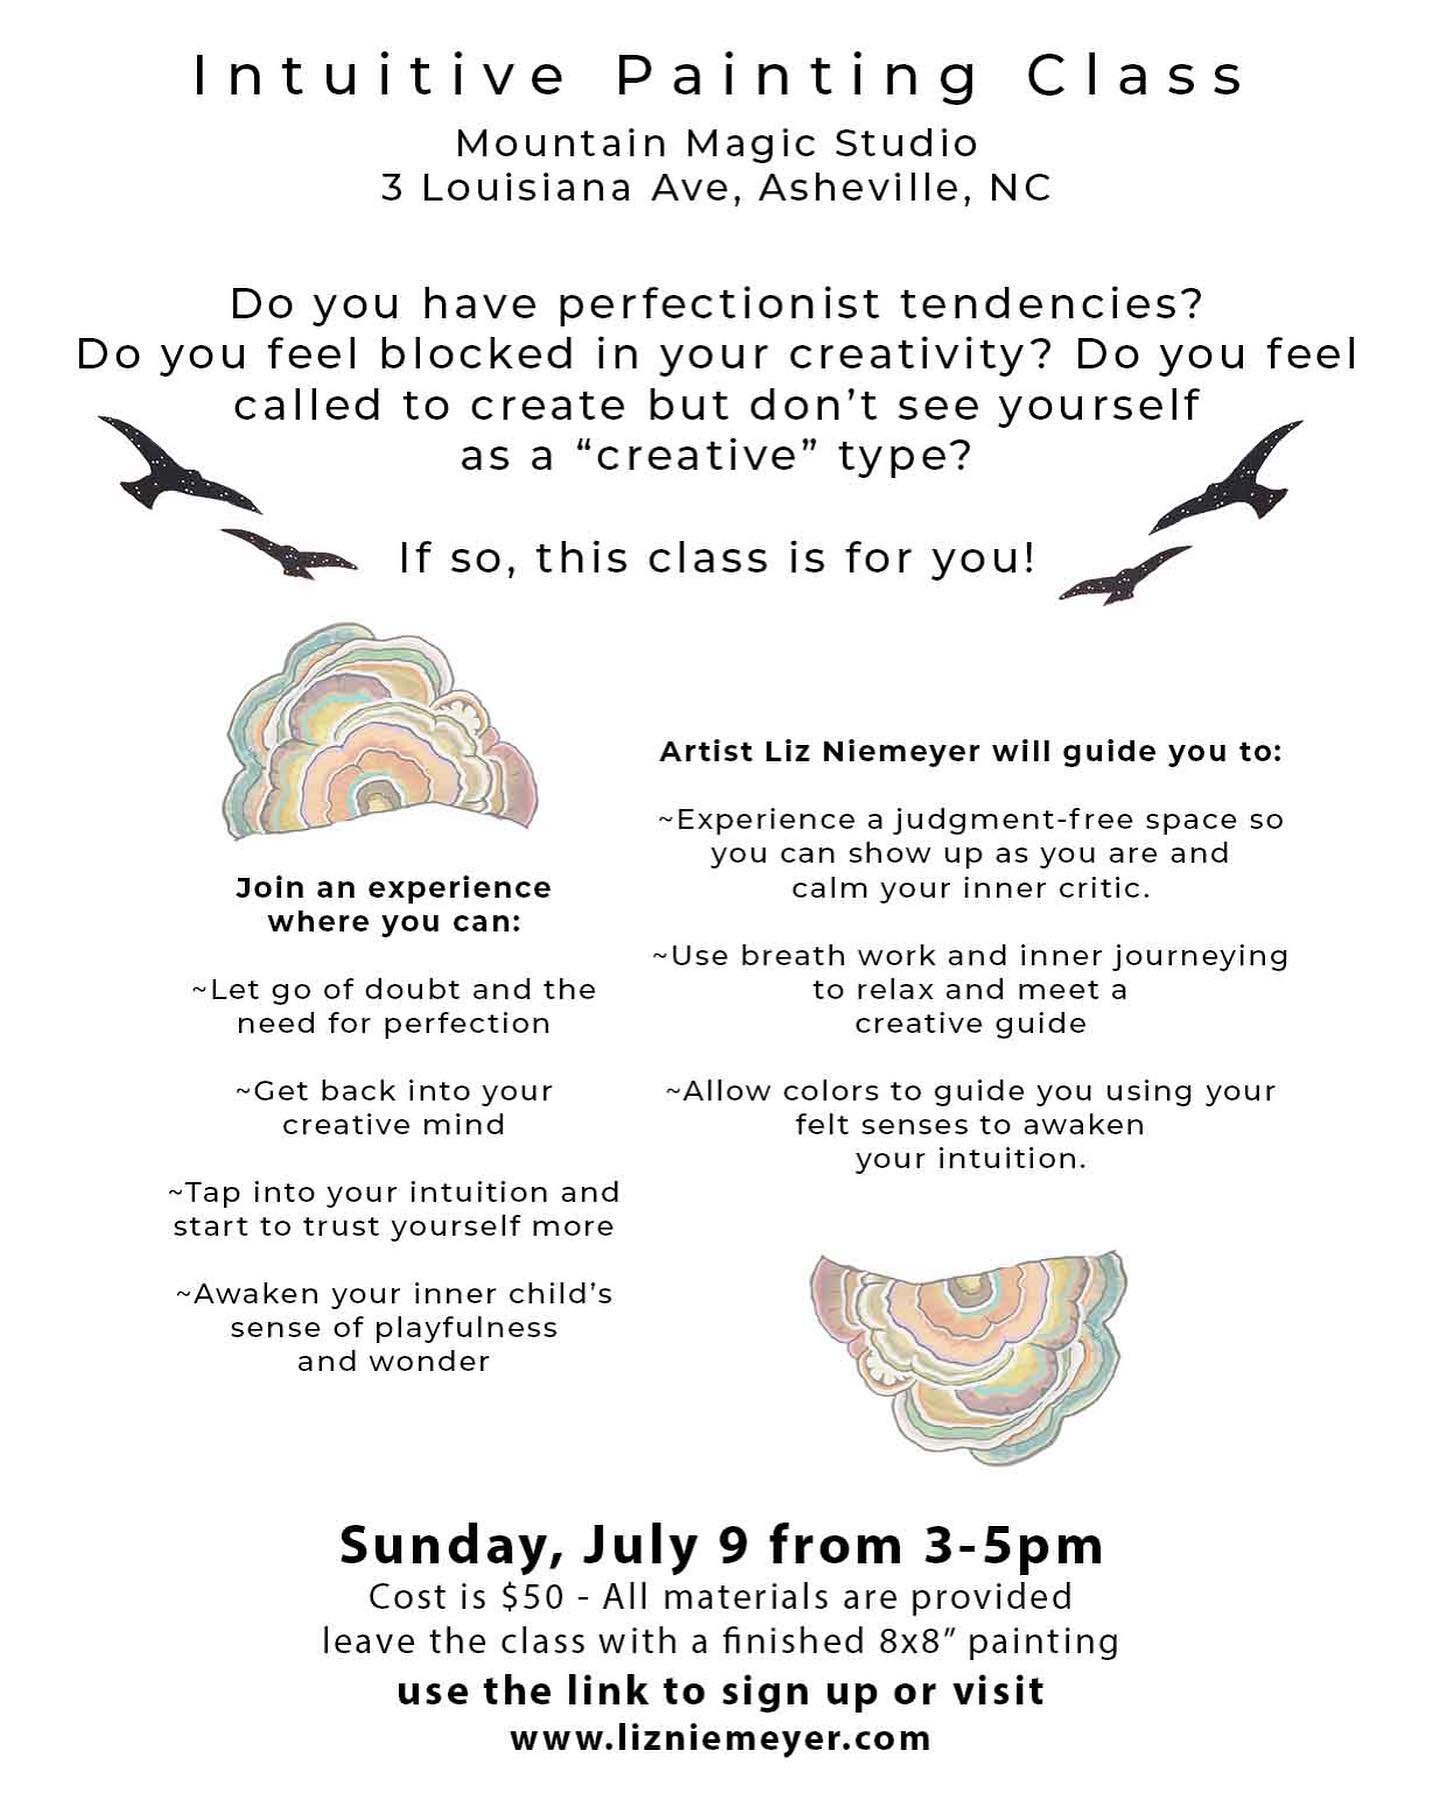 Do you have perfectionist tendencies that keep you from fully expressing your creative self? 

Are you feeling blocked in your creativity?

Do you feel called to create but don&rsquo;t see yourself as a &ldquo;creative&rdquo; type? 

If so, this clas